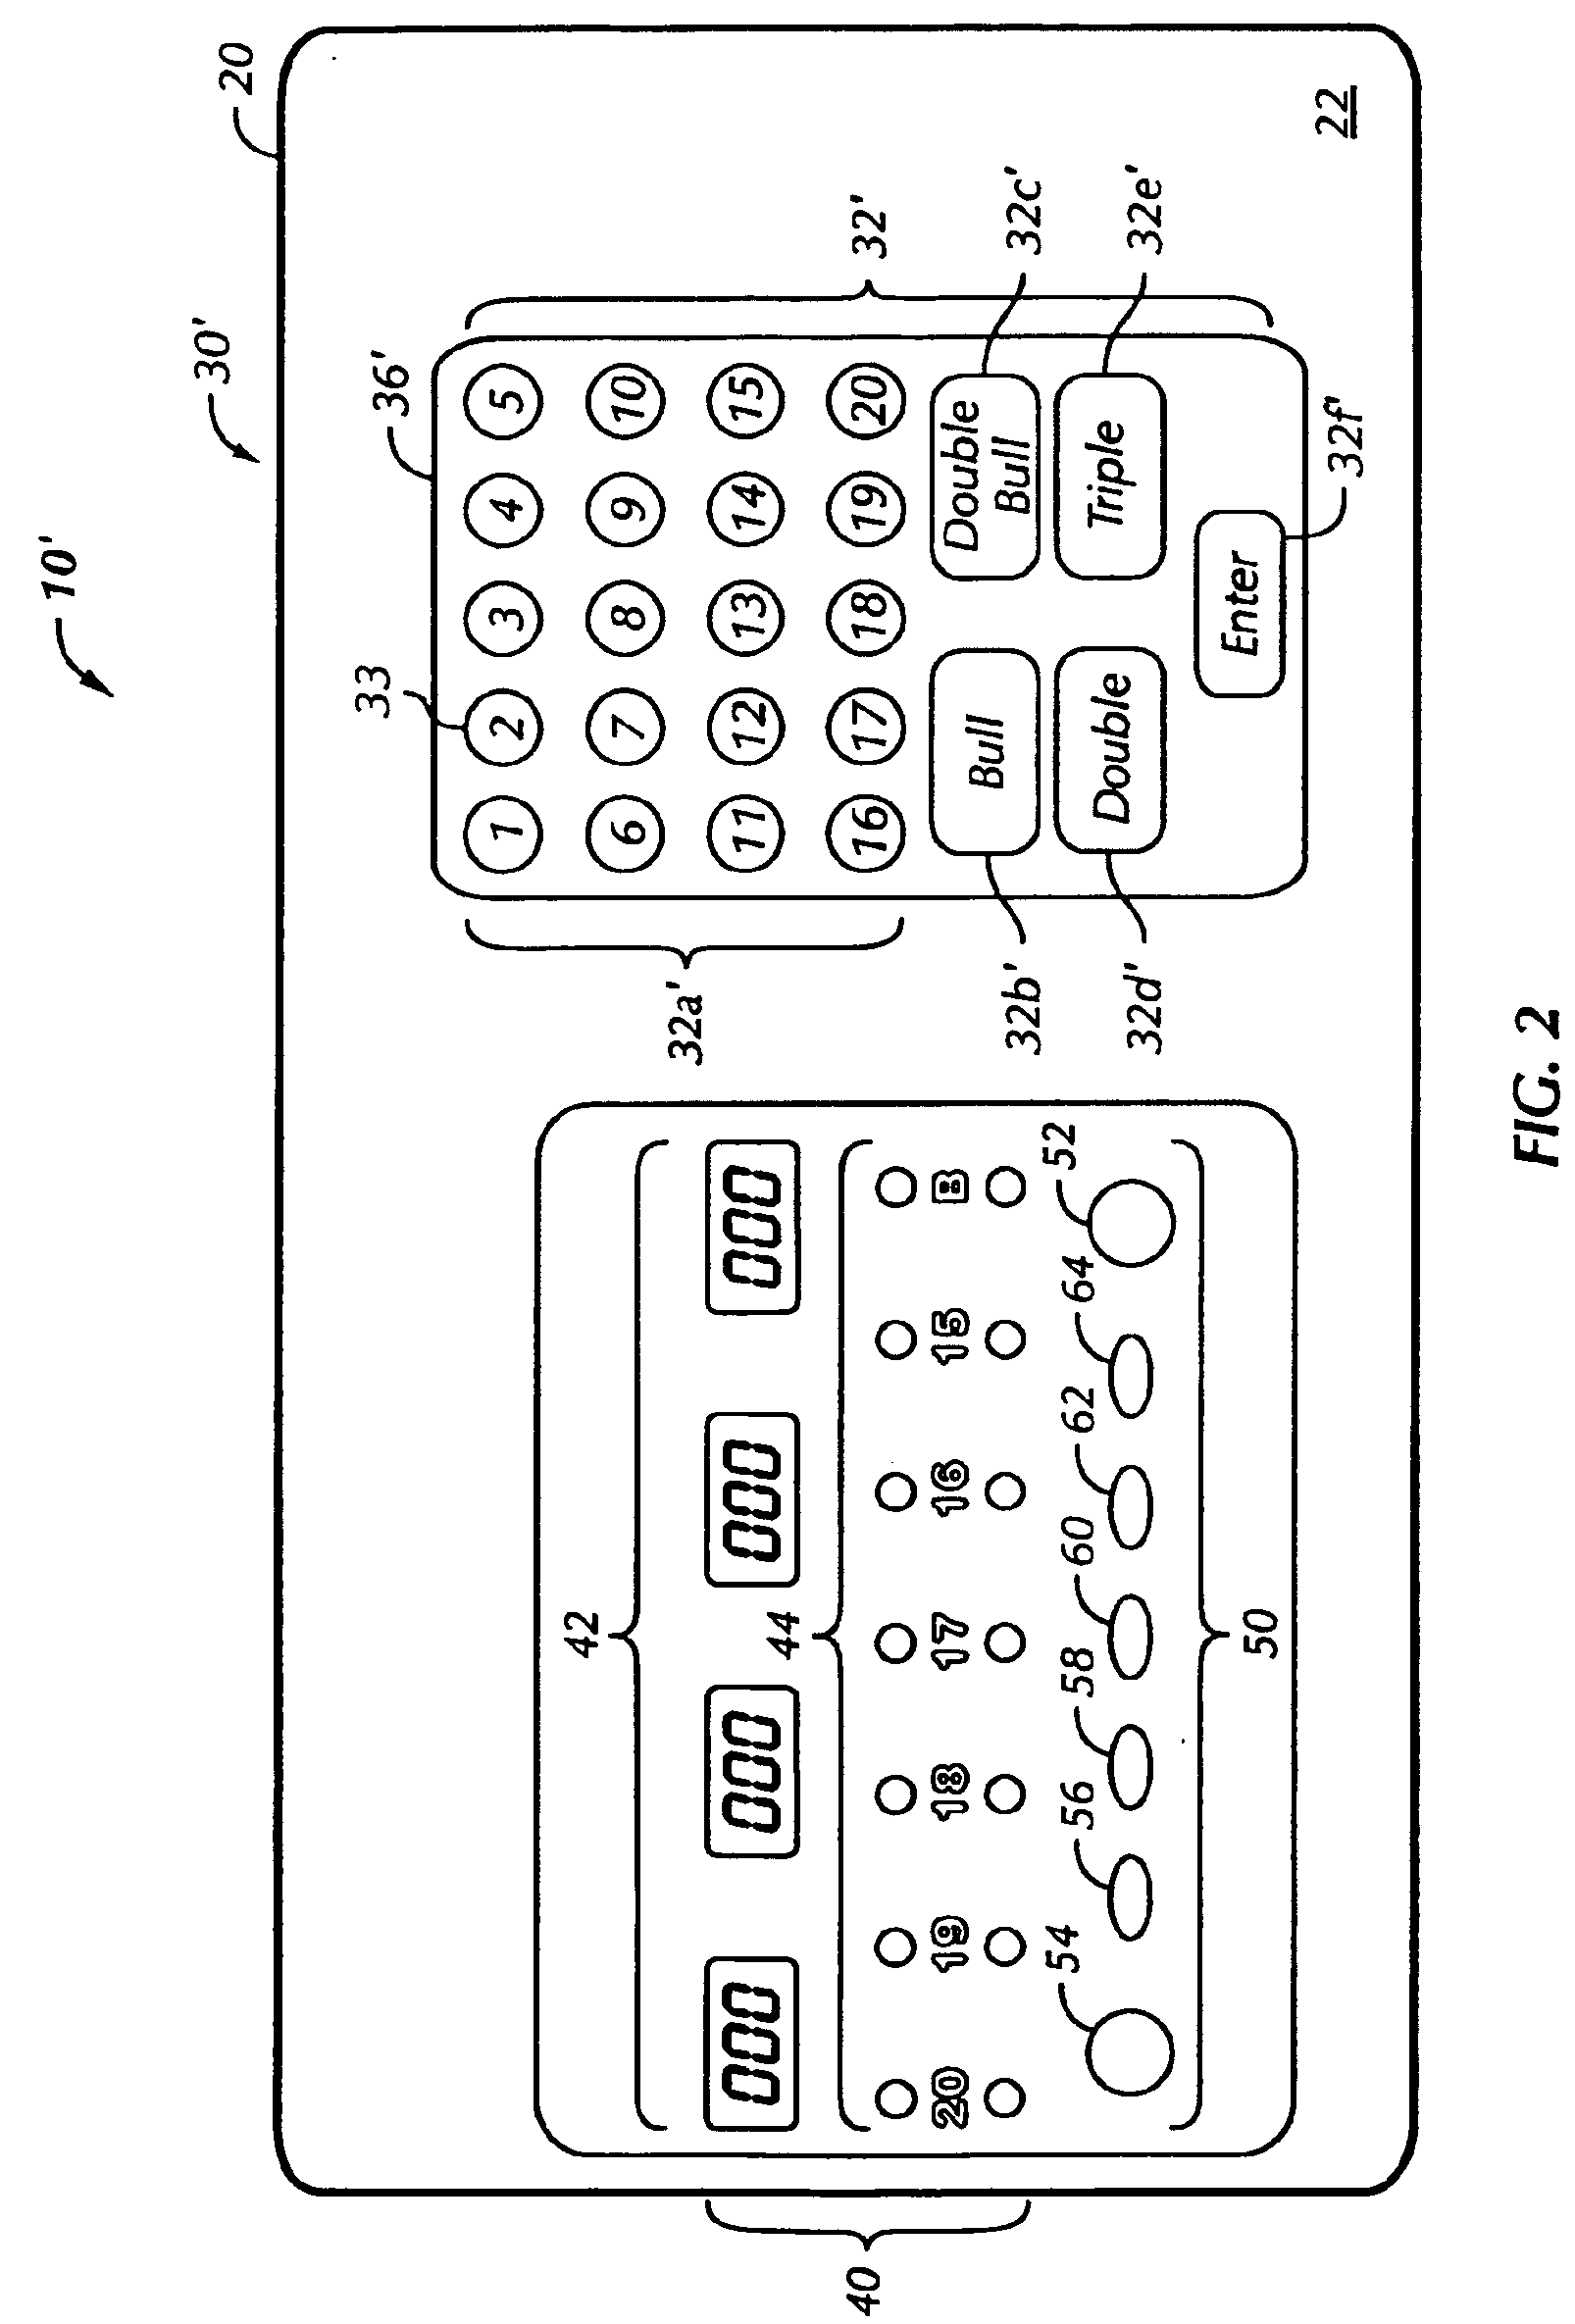 Touch pad scoring apparatus for dart games